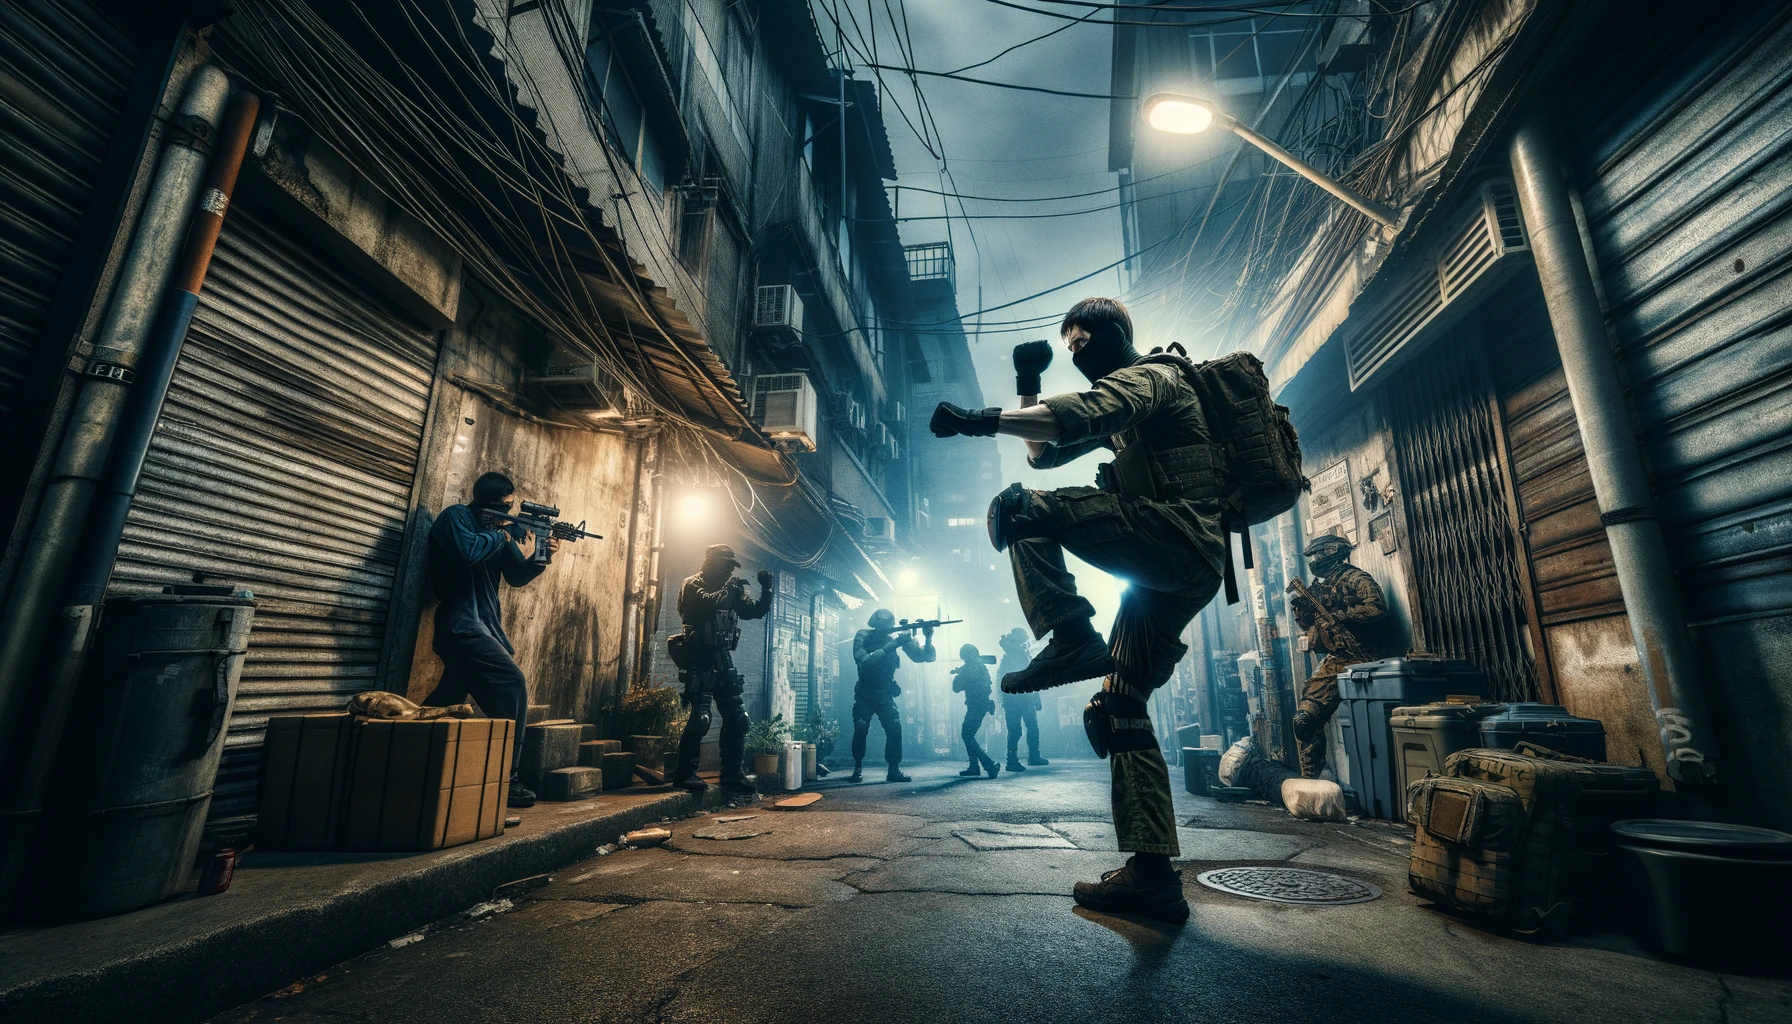 Prepper practicing self-defense in an urban environment with martial arts, improvised weapons, and tactical gear, emphasizing readiness and awareness